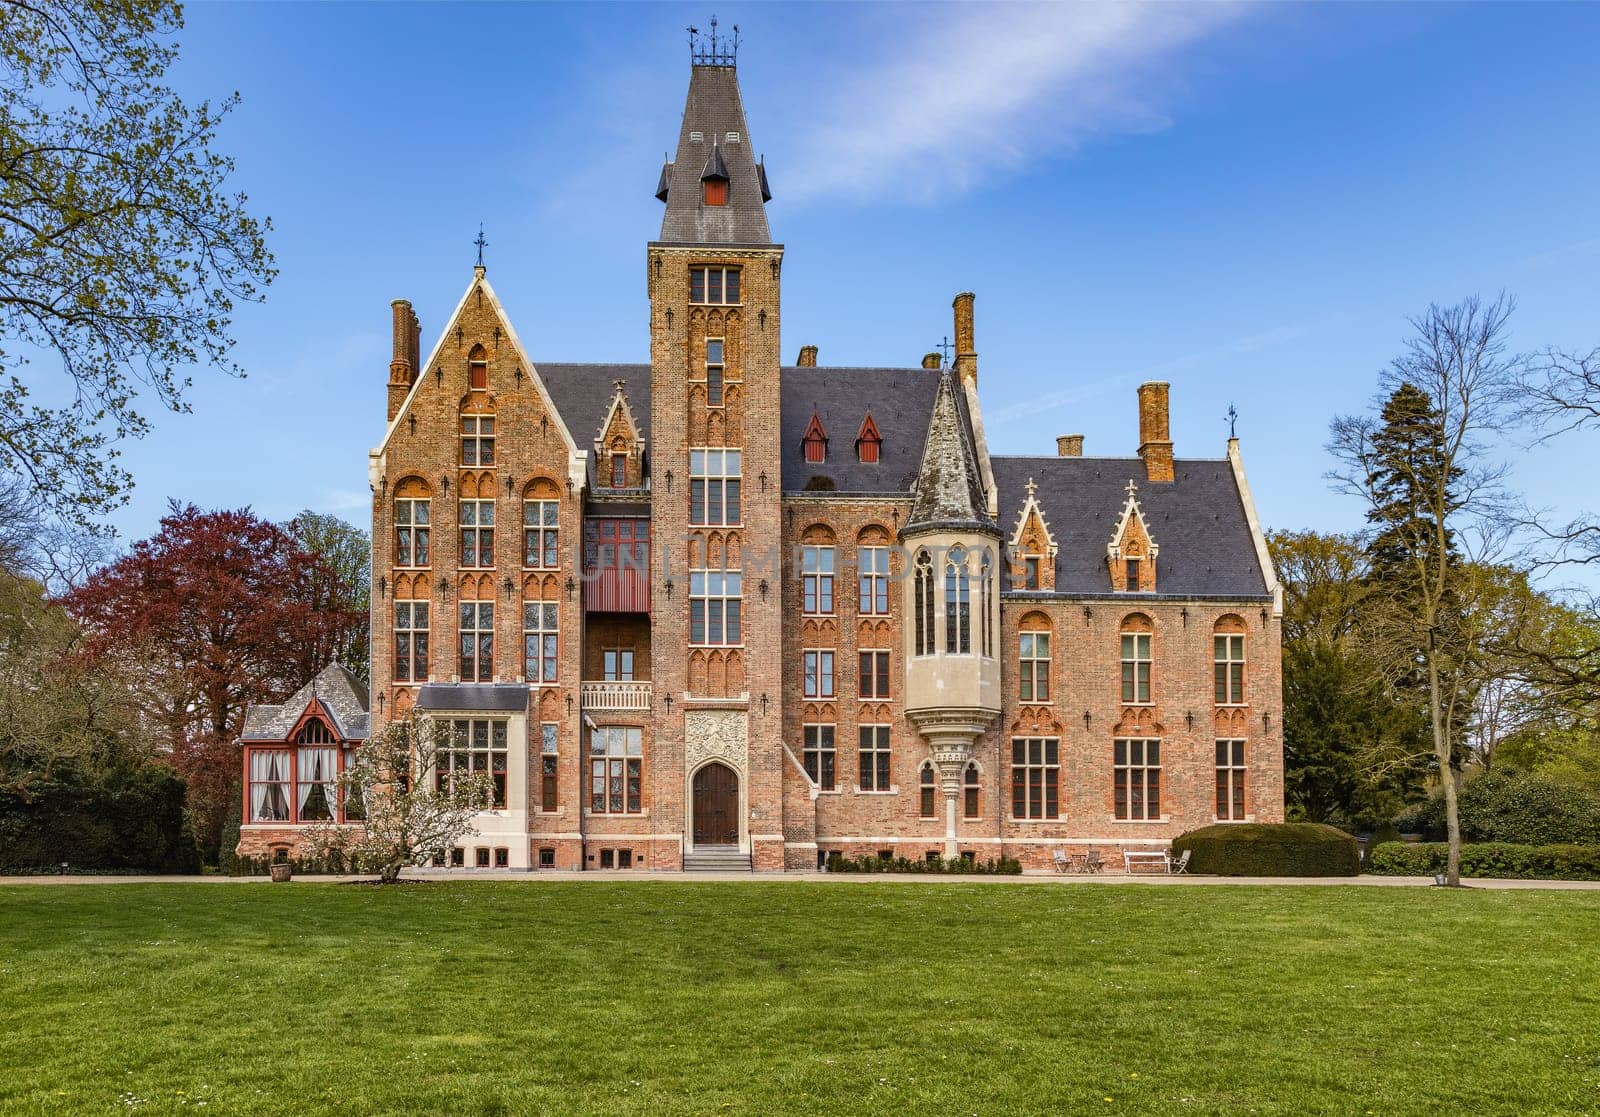 Loppem Castle is a castle situated in Loppem in the municipality of Zedelgem, near Bruges in West Flanders, in the Flemish Region of Belgium.